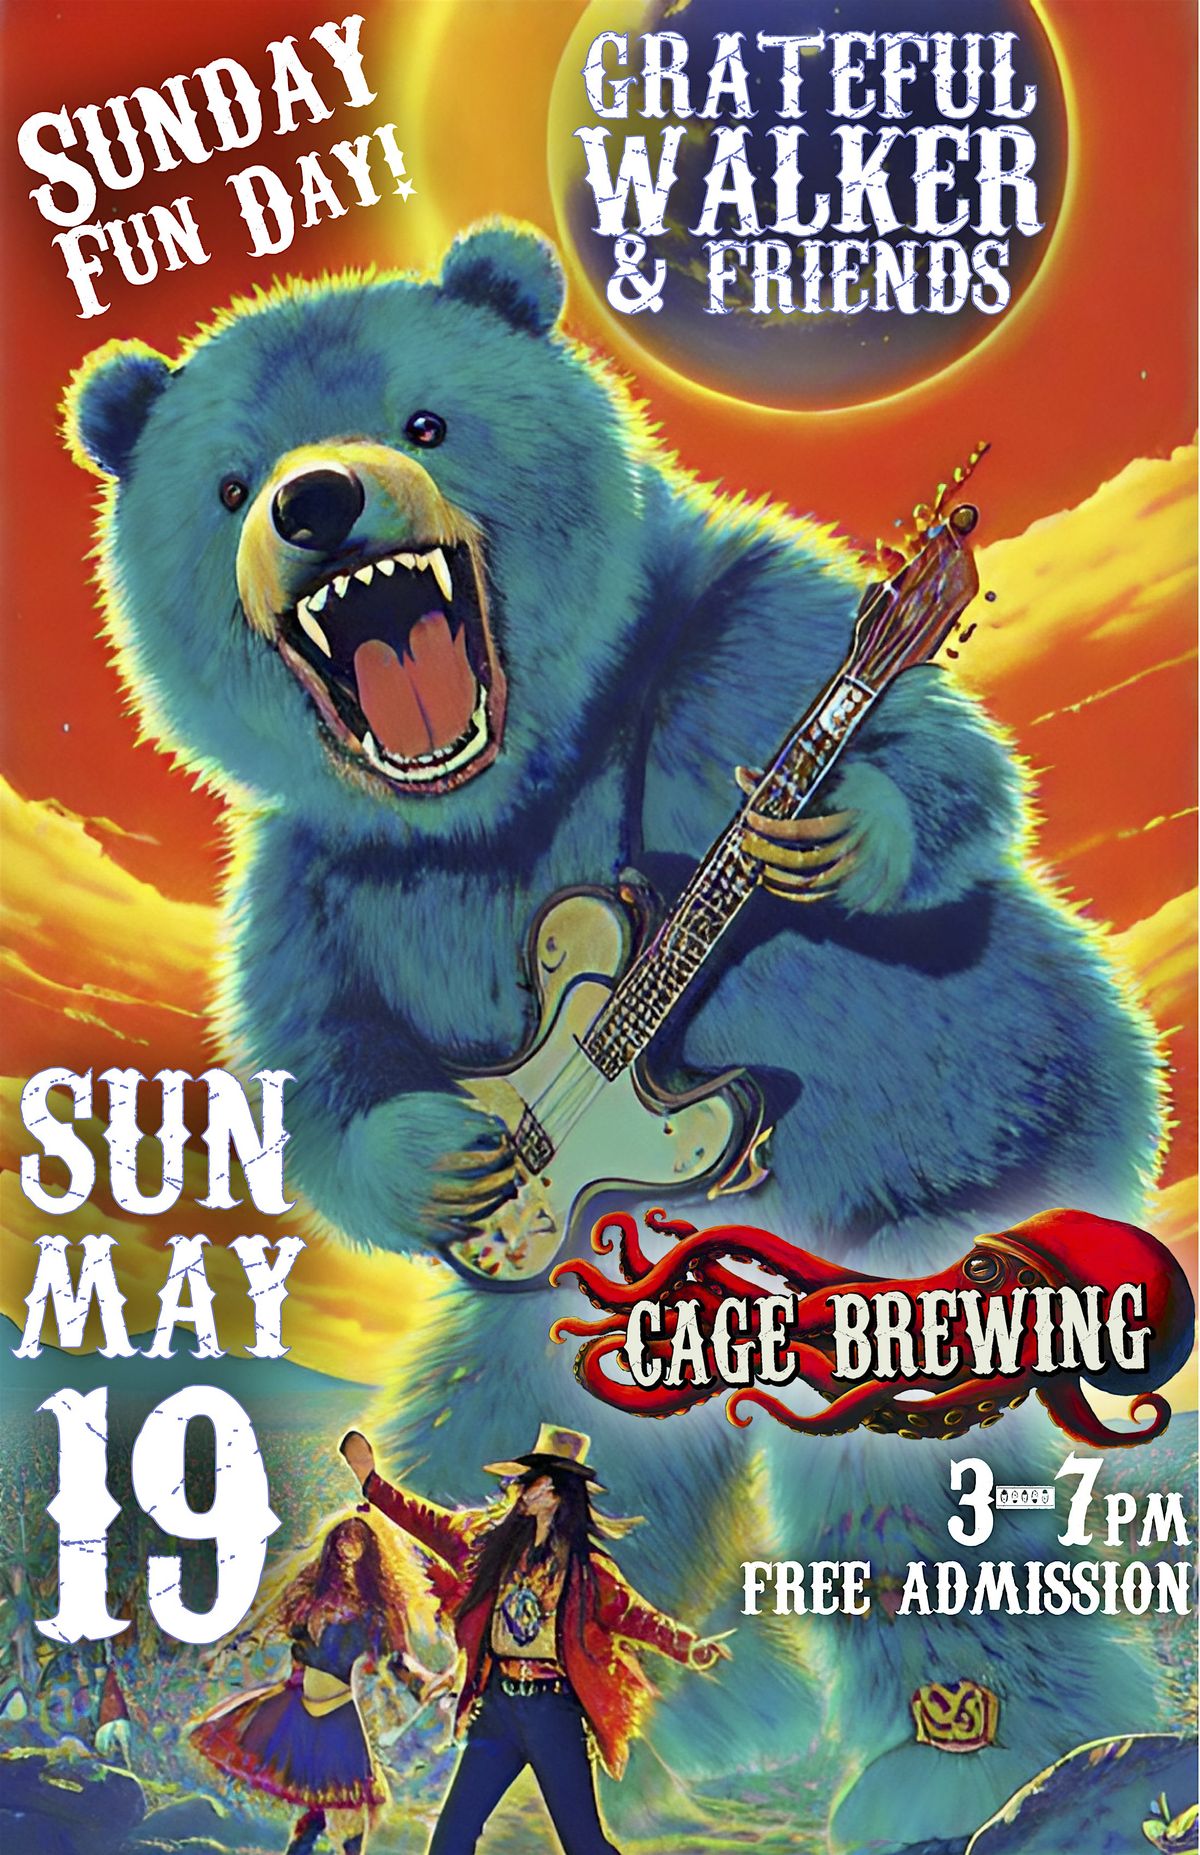 Grateful Walker & Friends LIVE | Cage Brewing, St. Pete, FL | SUN MAY 19 | Free admission